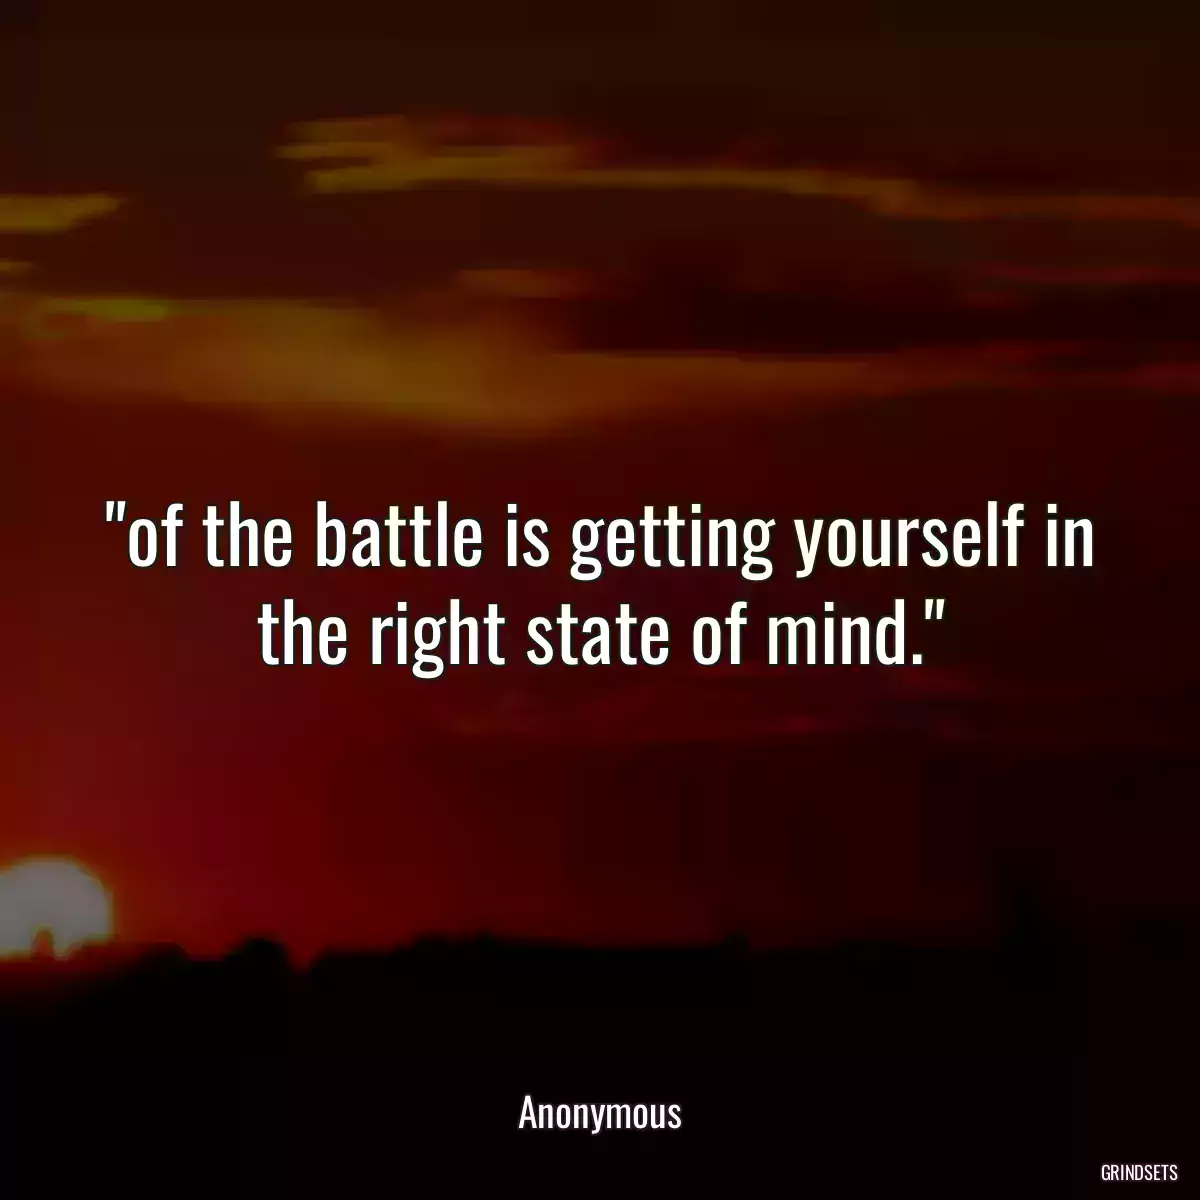 of the battle is getting yourself in the right state of mind.